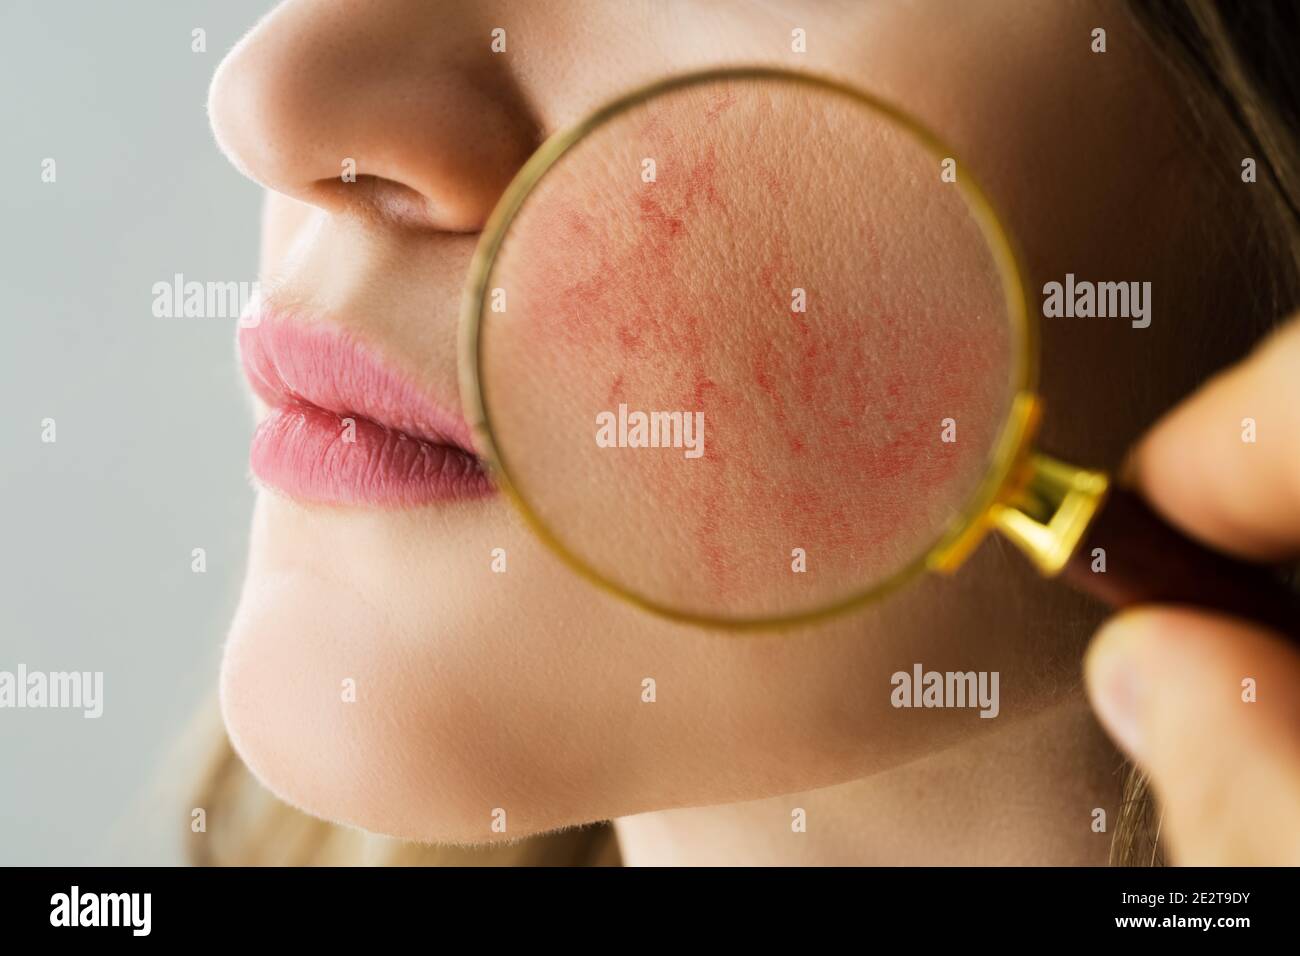 Rosacea Face Skin Problem And Aesthetic Treatment Stock Photo